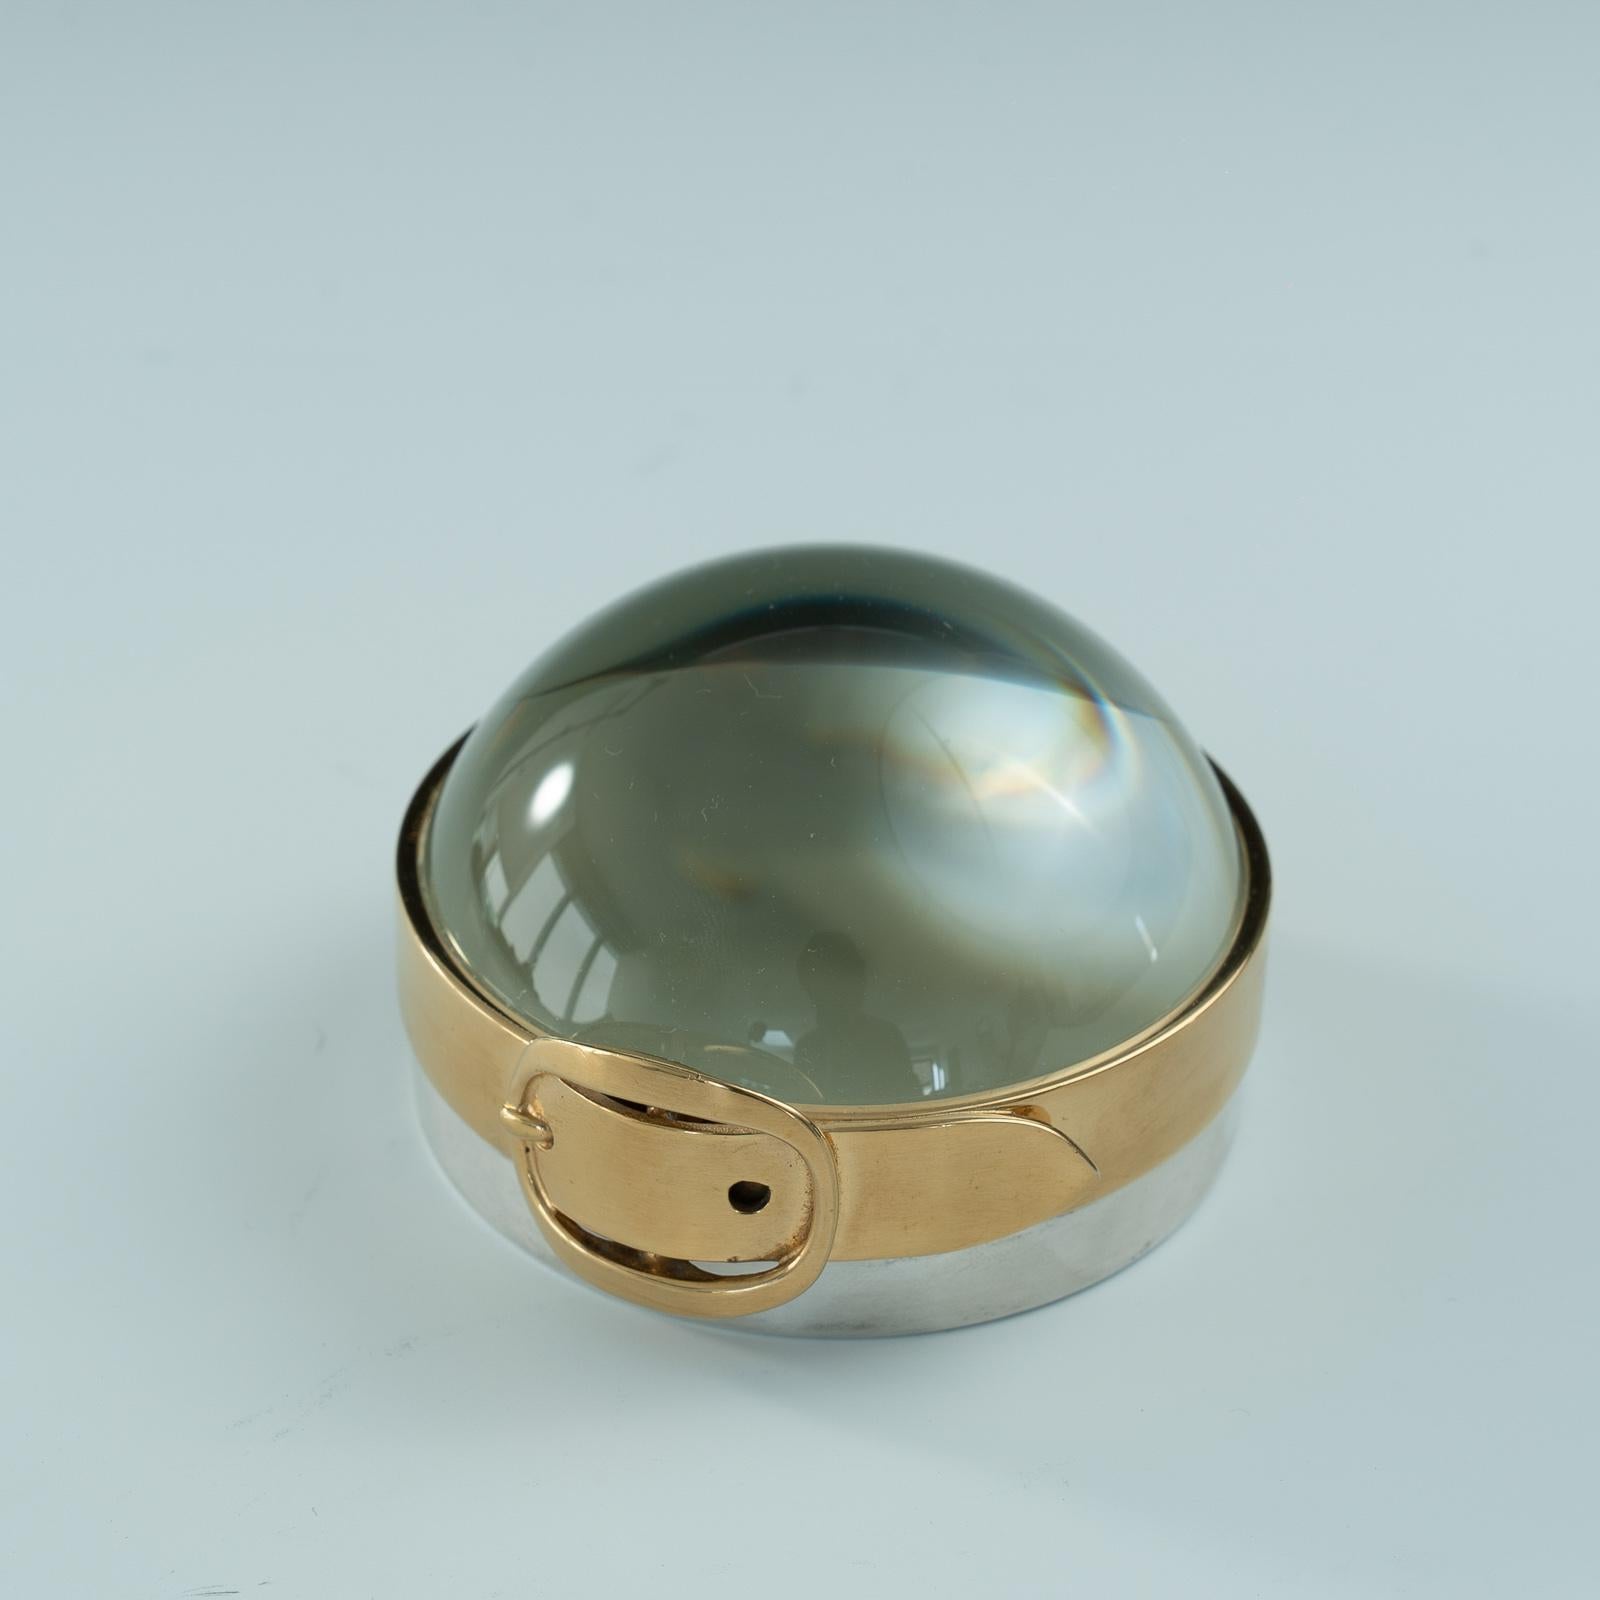 Hermès magnifying loupe paper weight by Ravinet d’Enfert in the manner of Maria Pergay
Silver plated with gold plated belt and buckle motif
Hermès Paris France circa 1960.